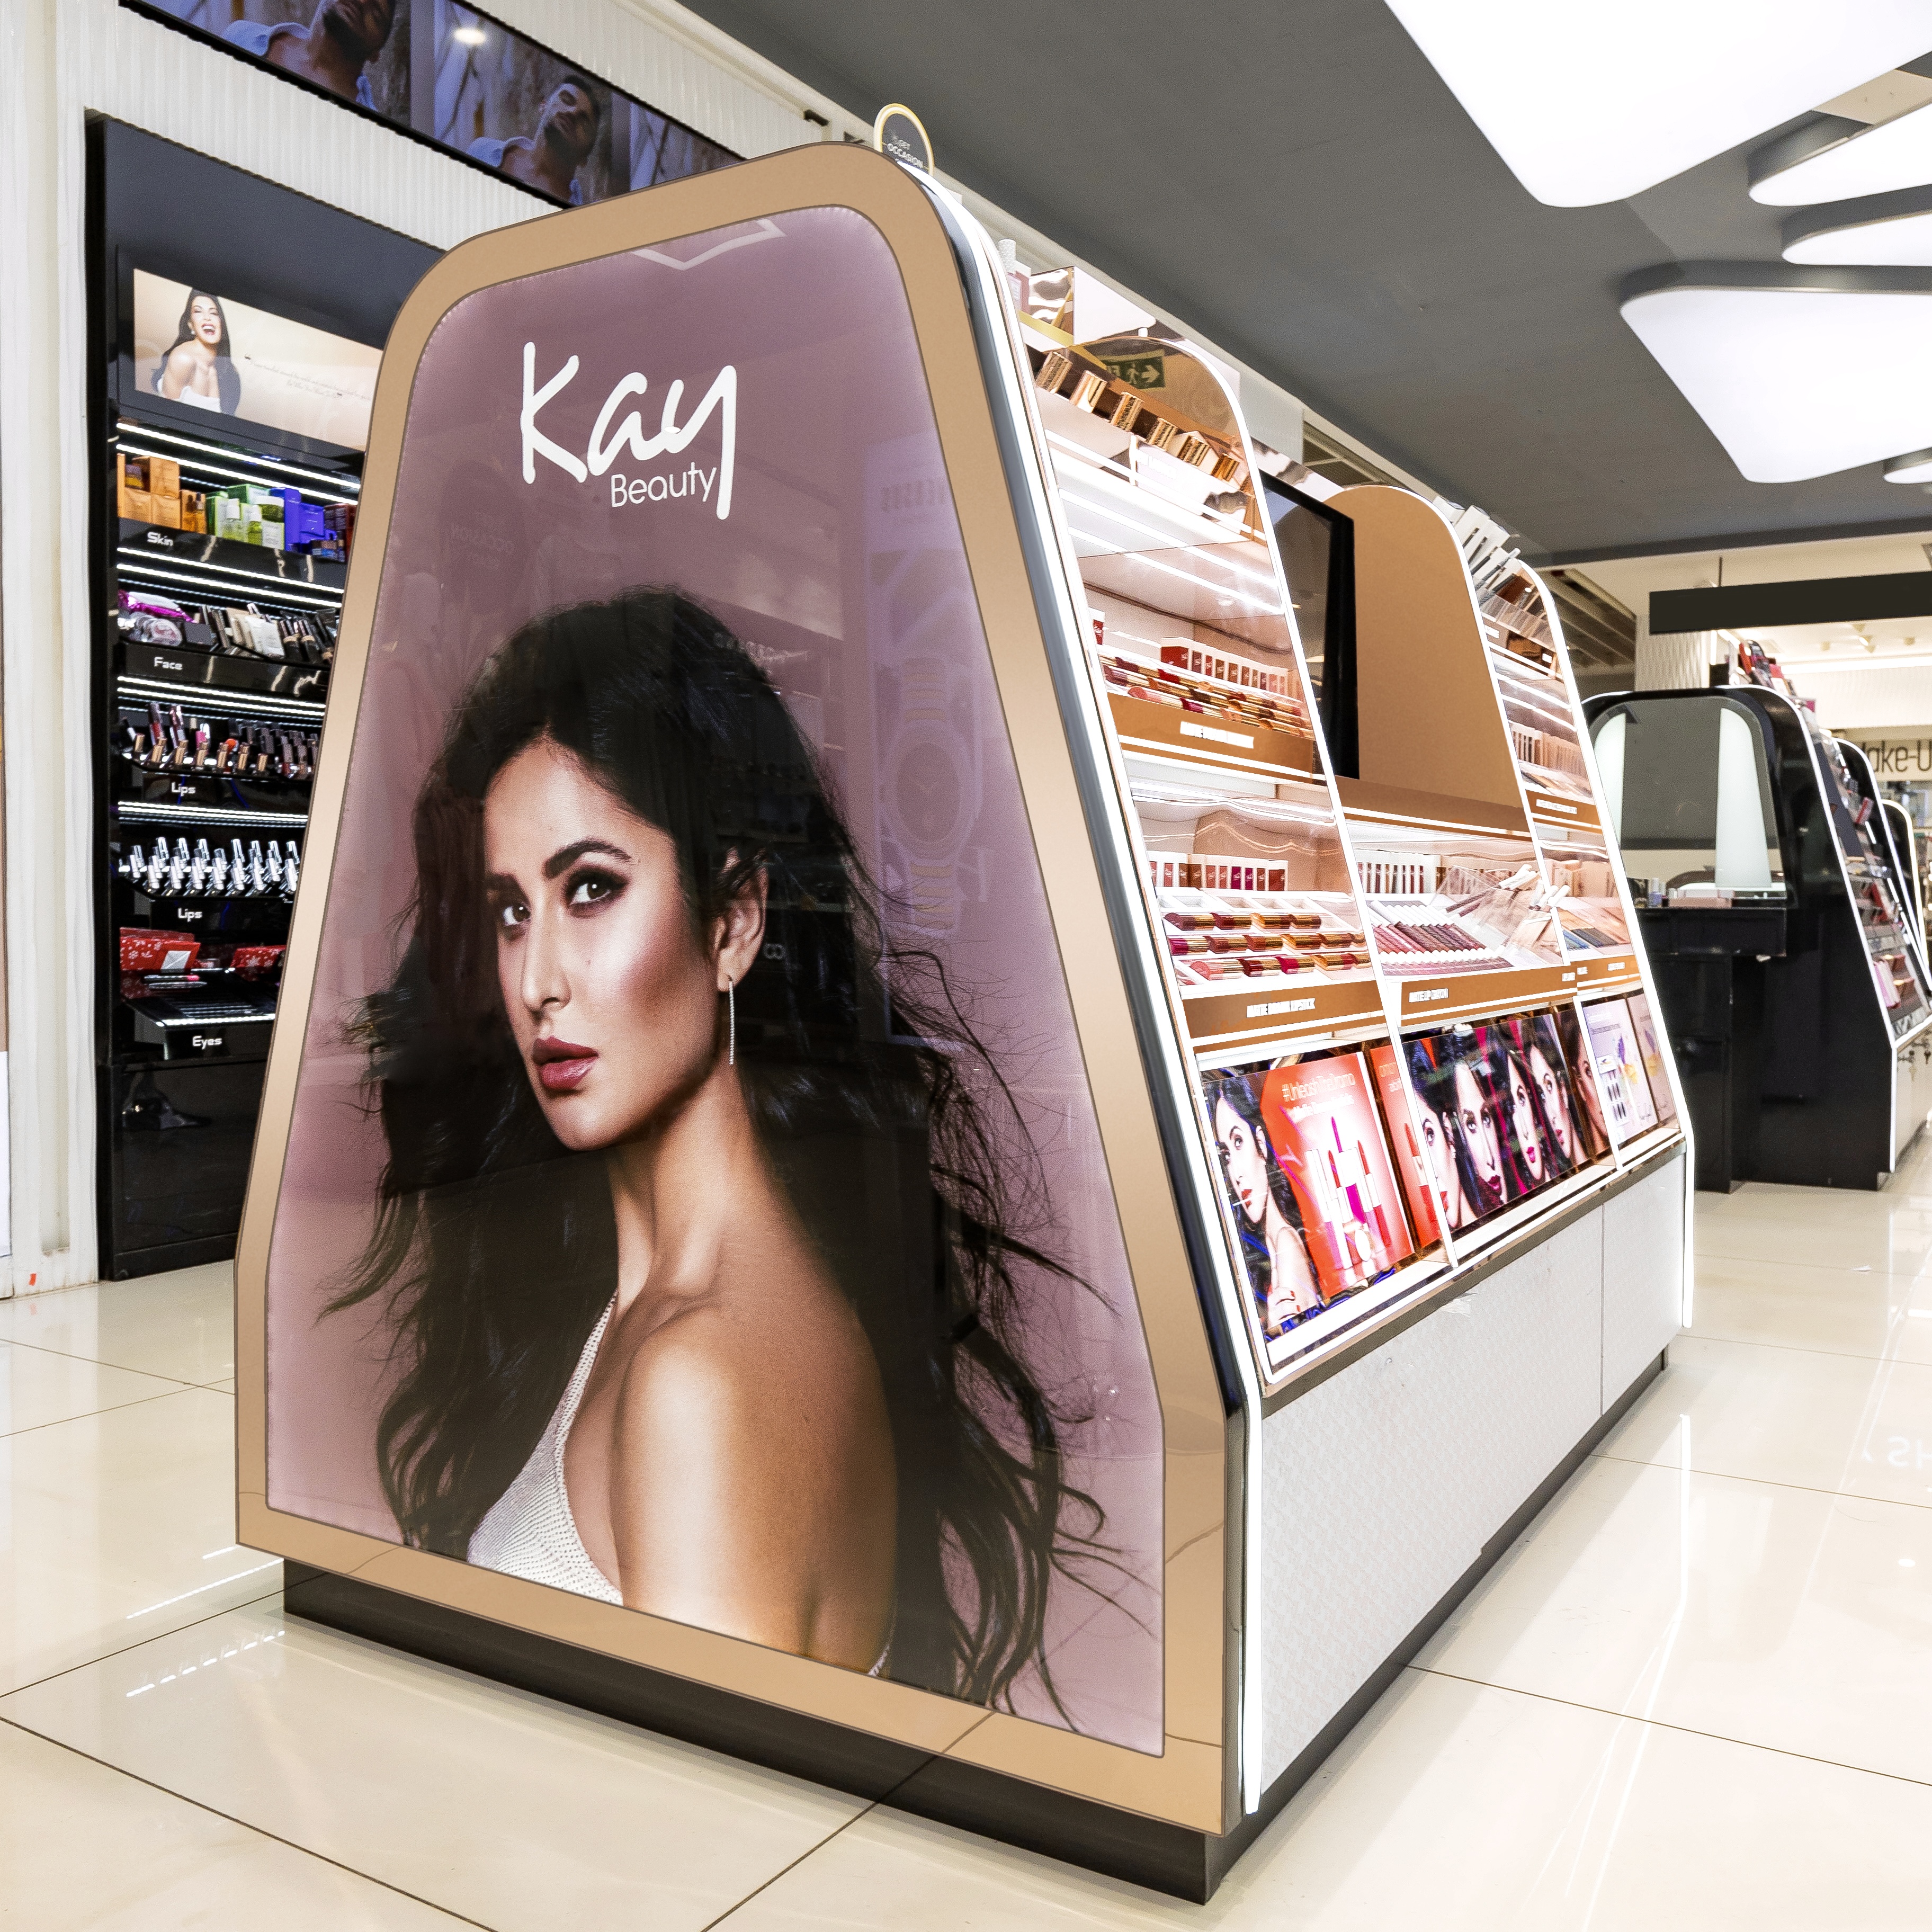 kay-beauty-expands-its-retail-footprint-entering-general-modern-trade-across-india